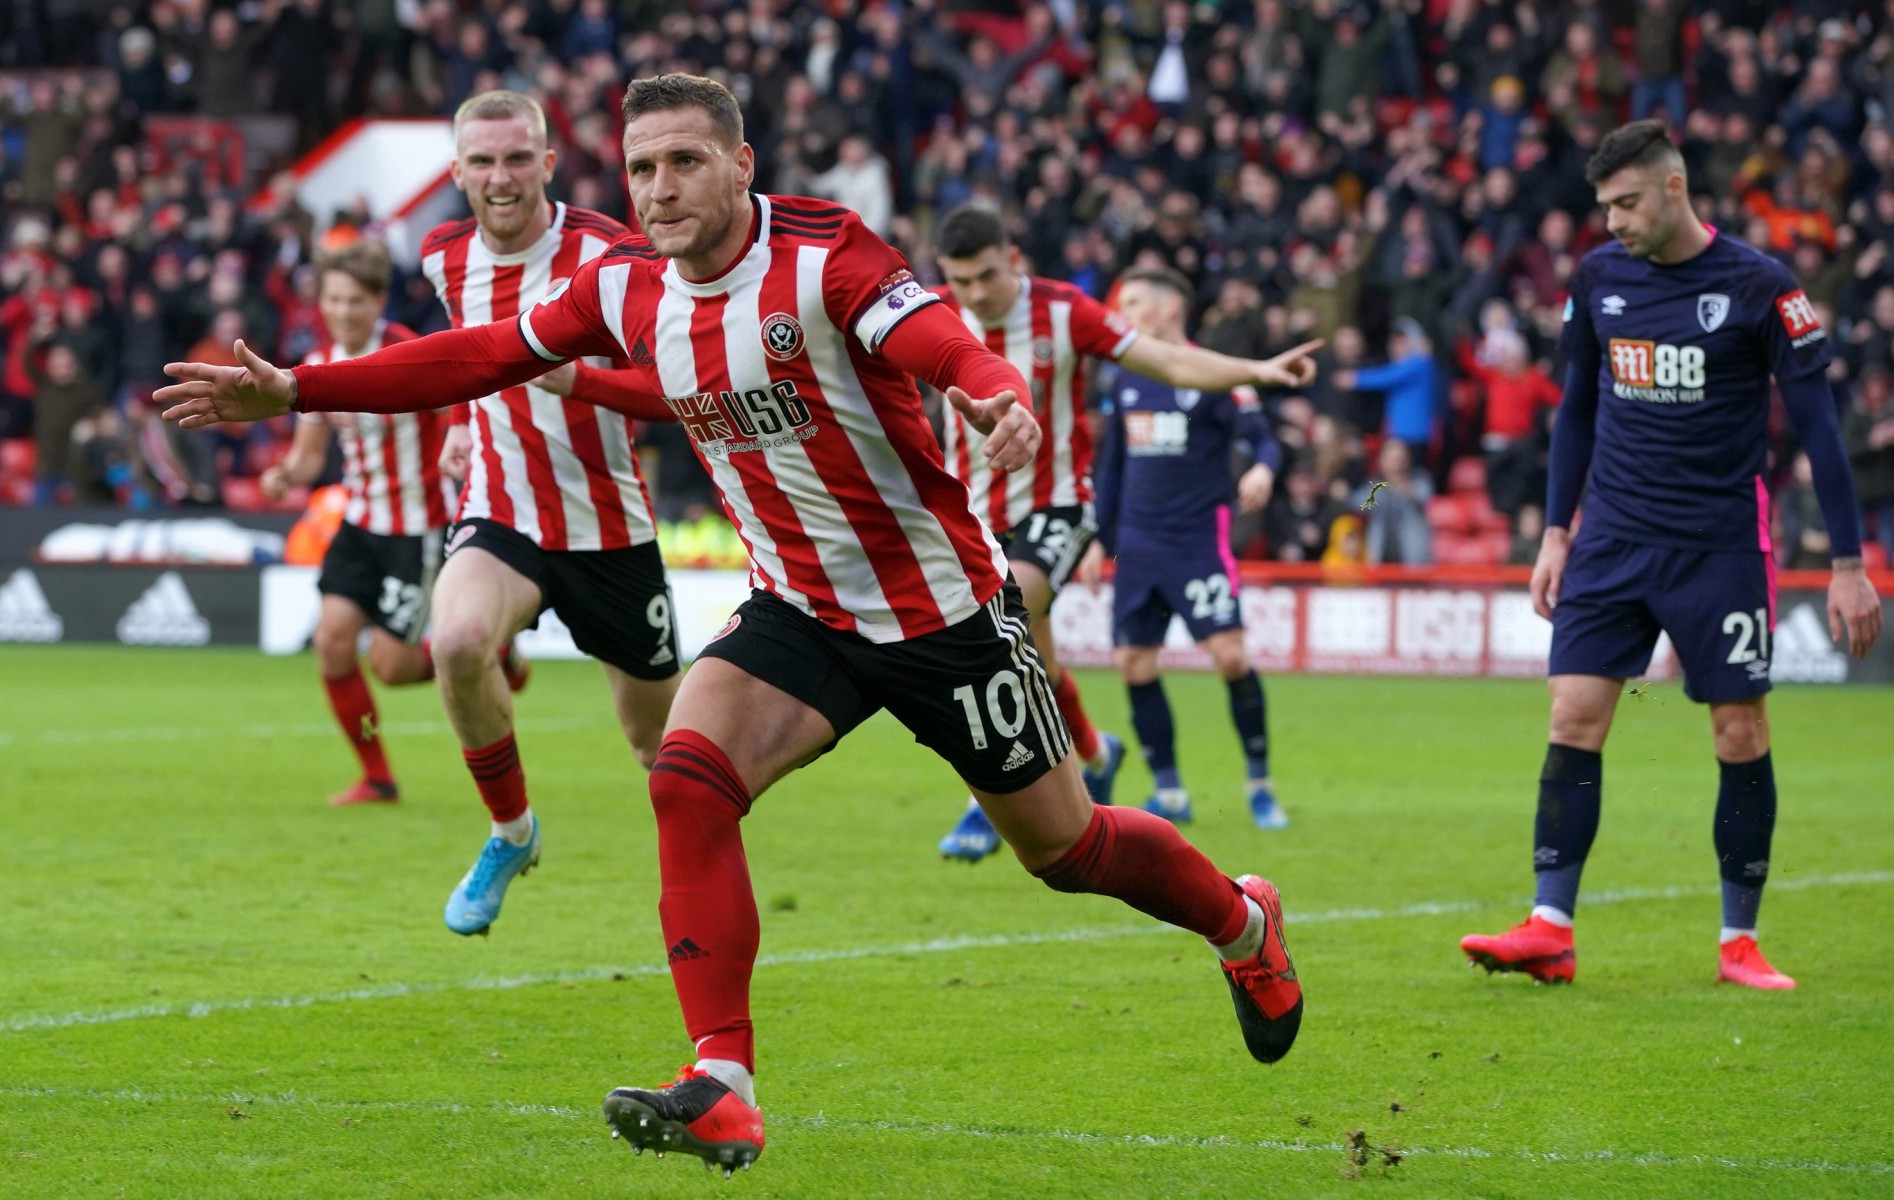 , Sheffield United 2 Bournemouth 1: Lundstrams brilliant late winner puts Blades fifth after fine comeback